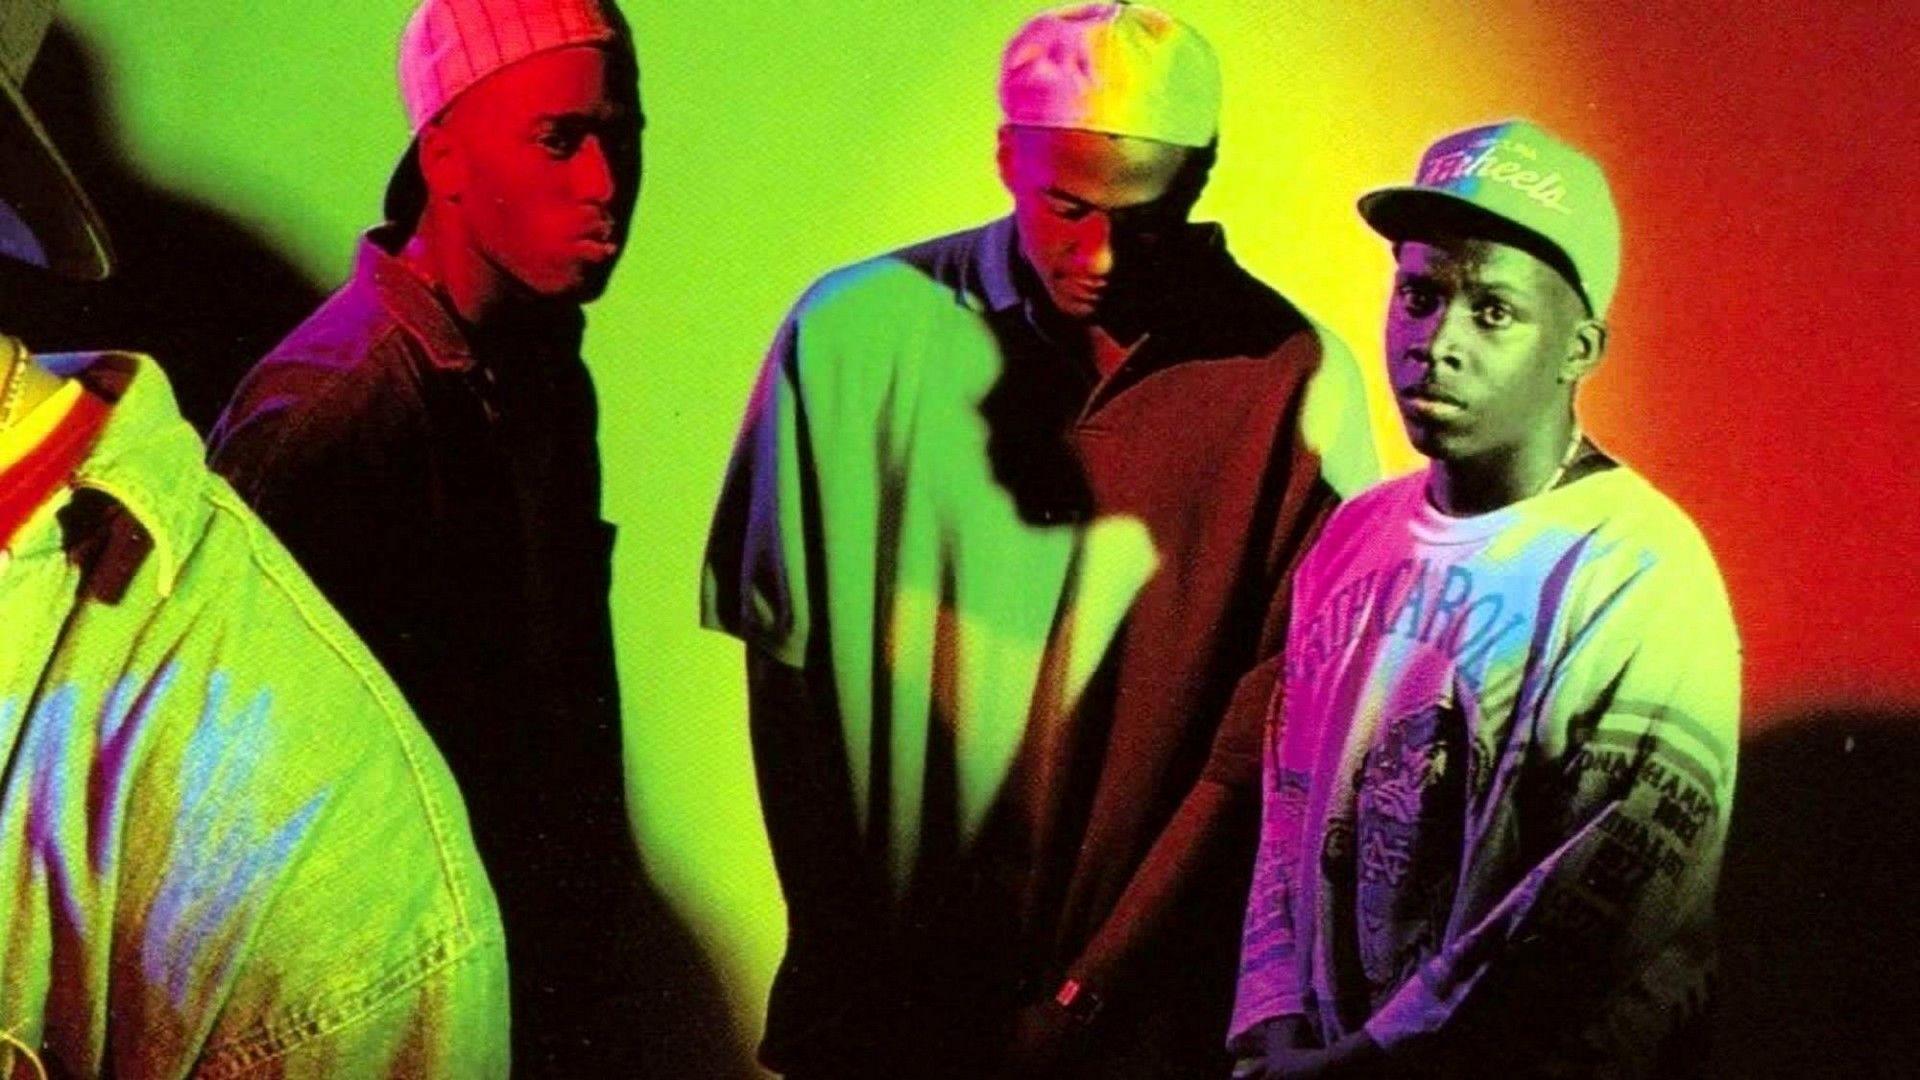 Kumpulan S In HD Tribe Called Quest Download HD S